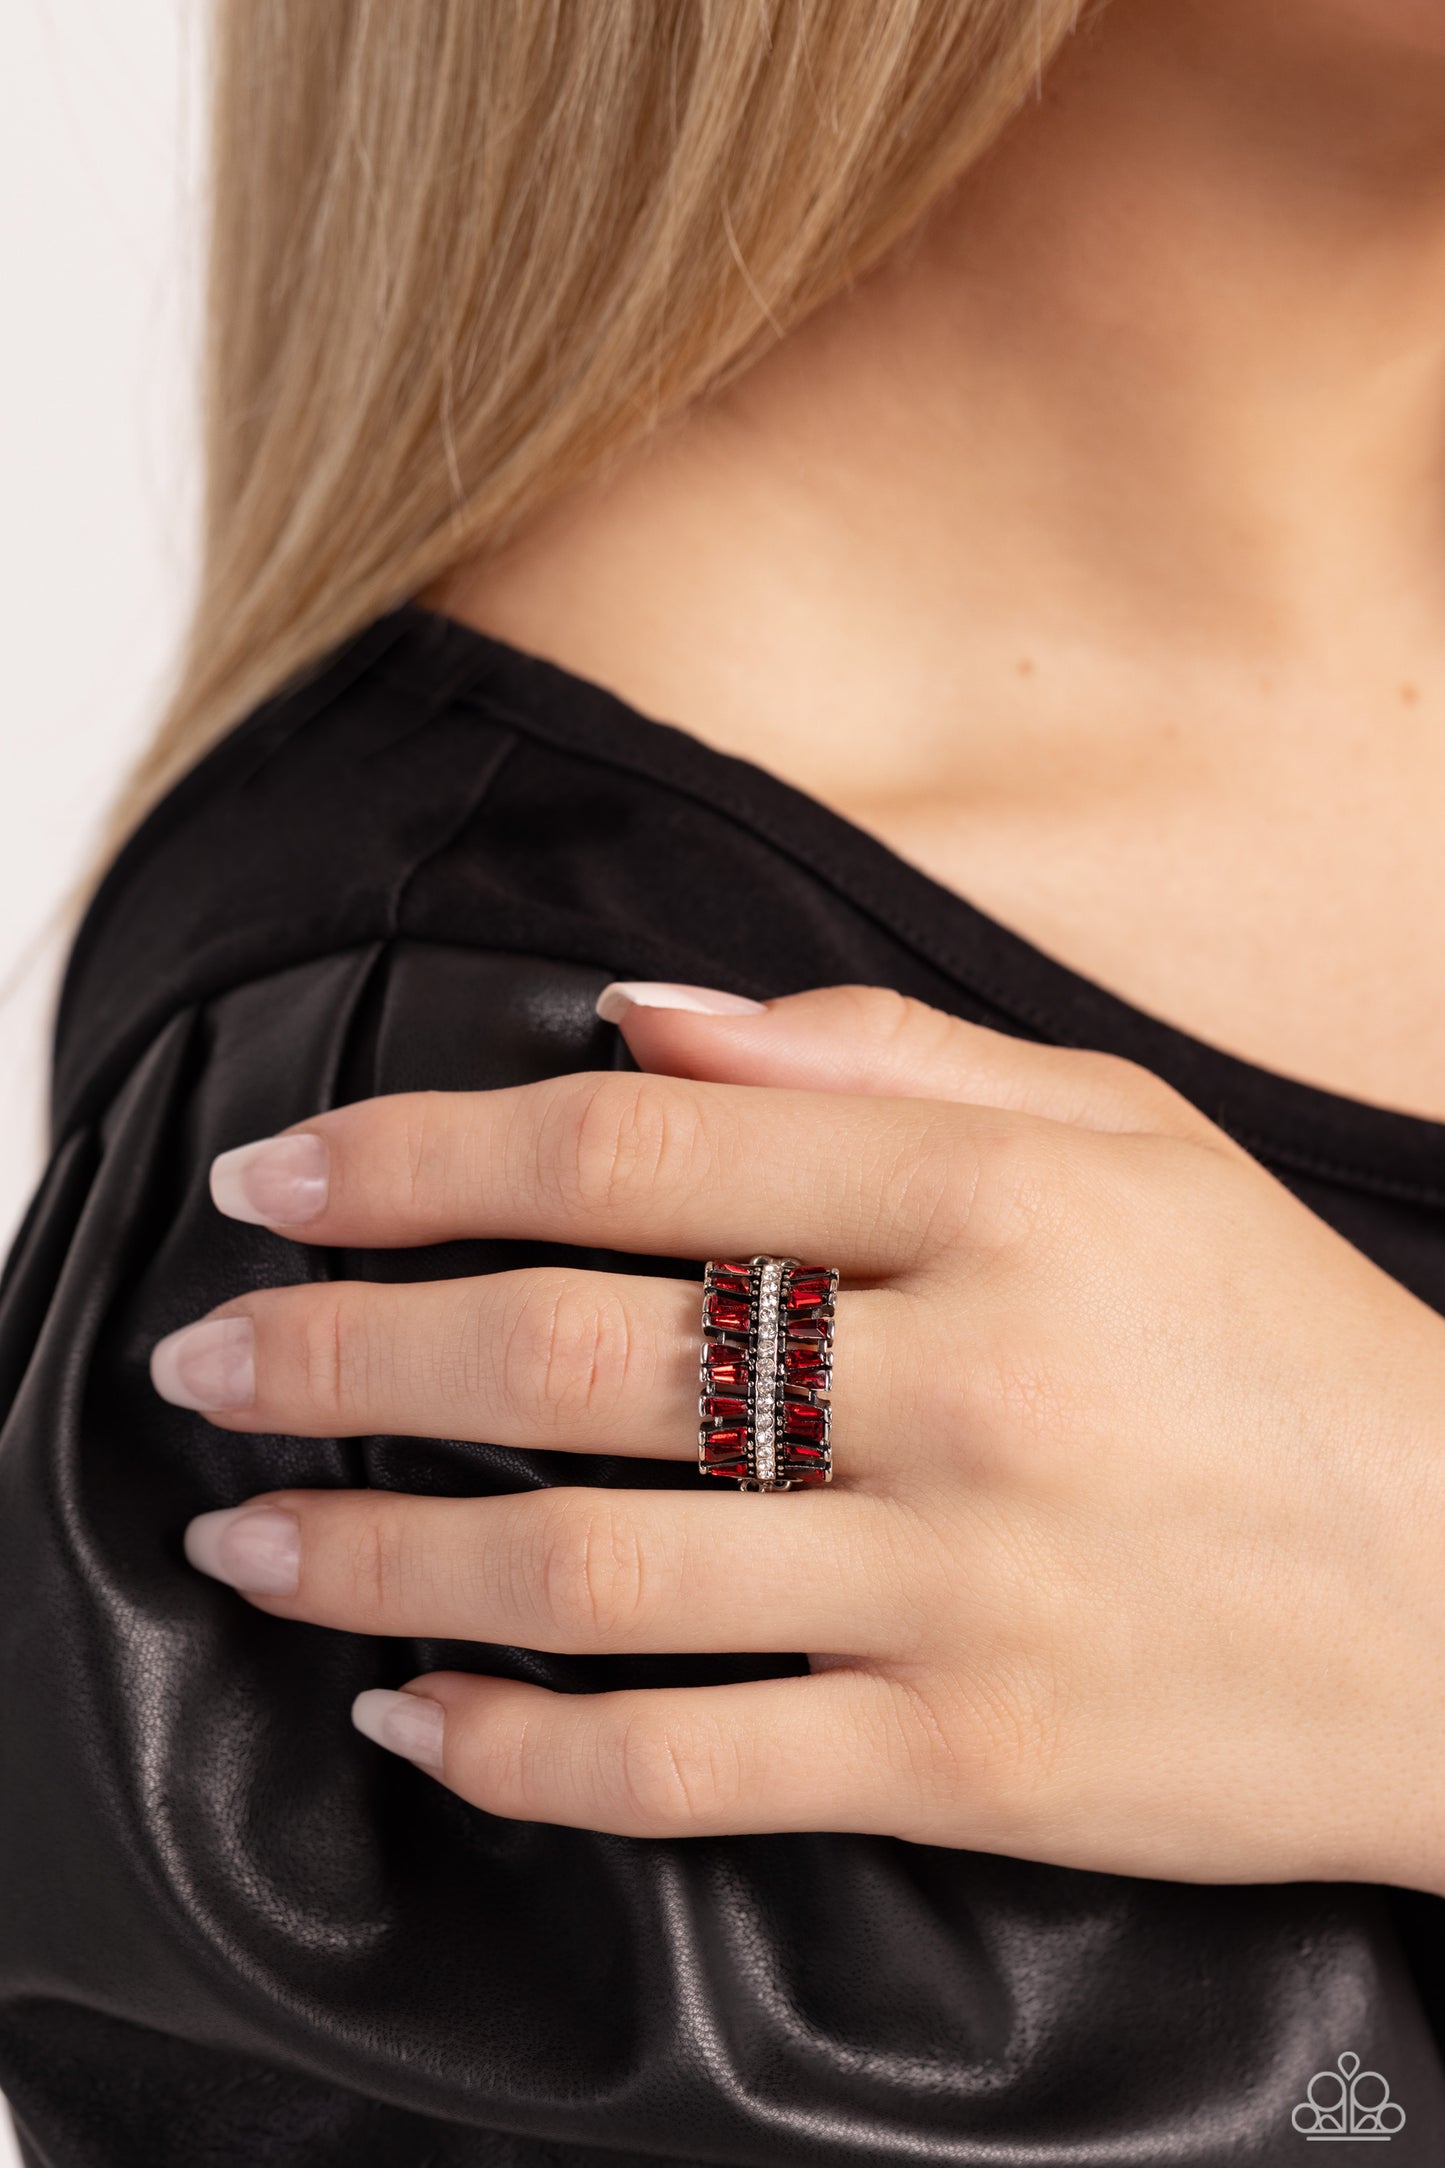 Paparazzi Rings - Staggering Stacks - Red